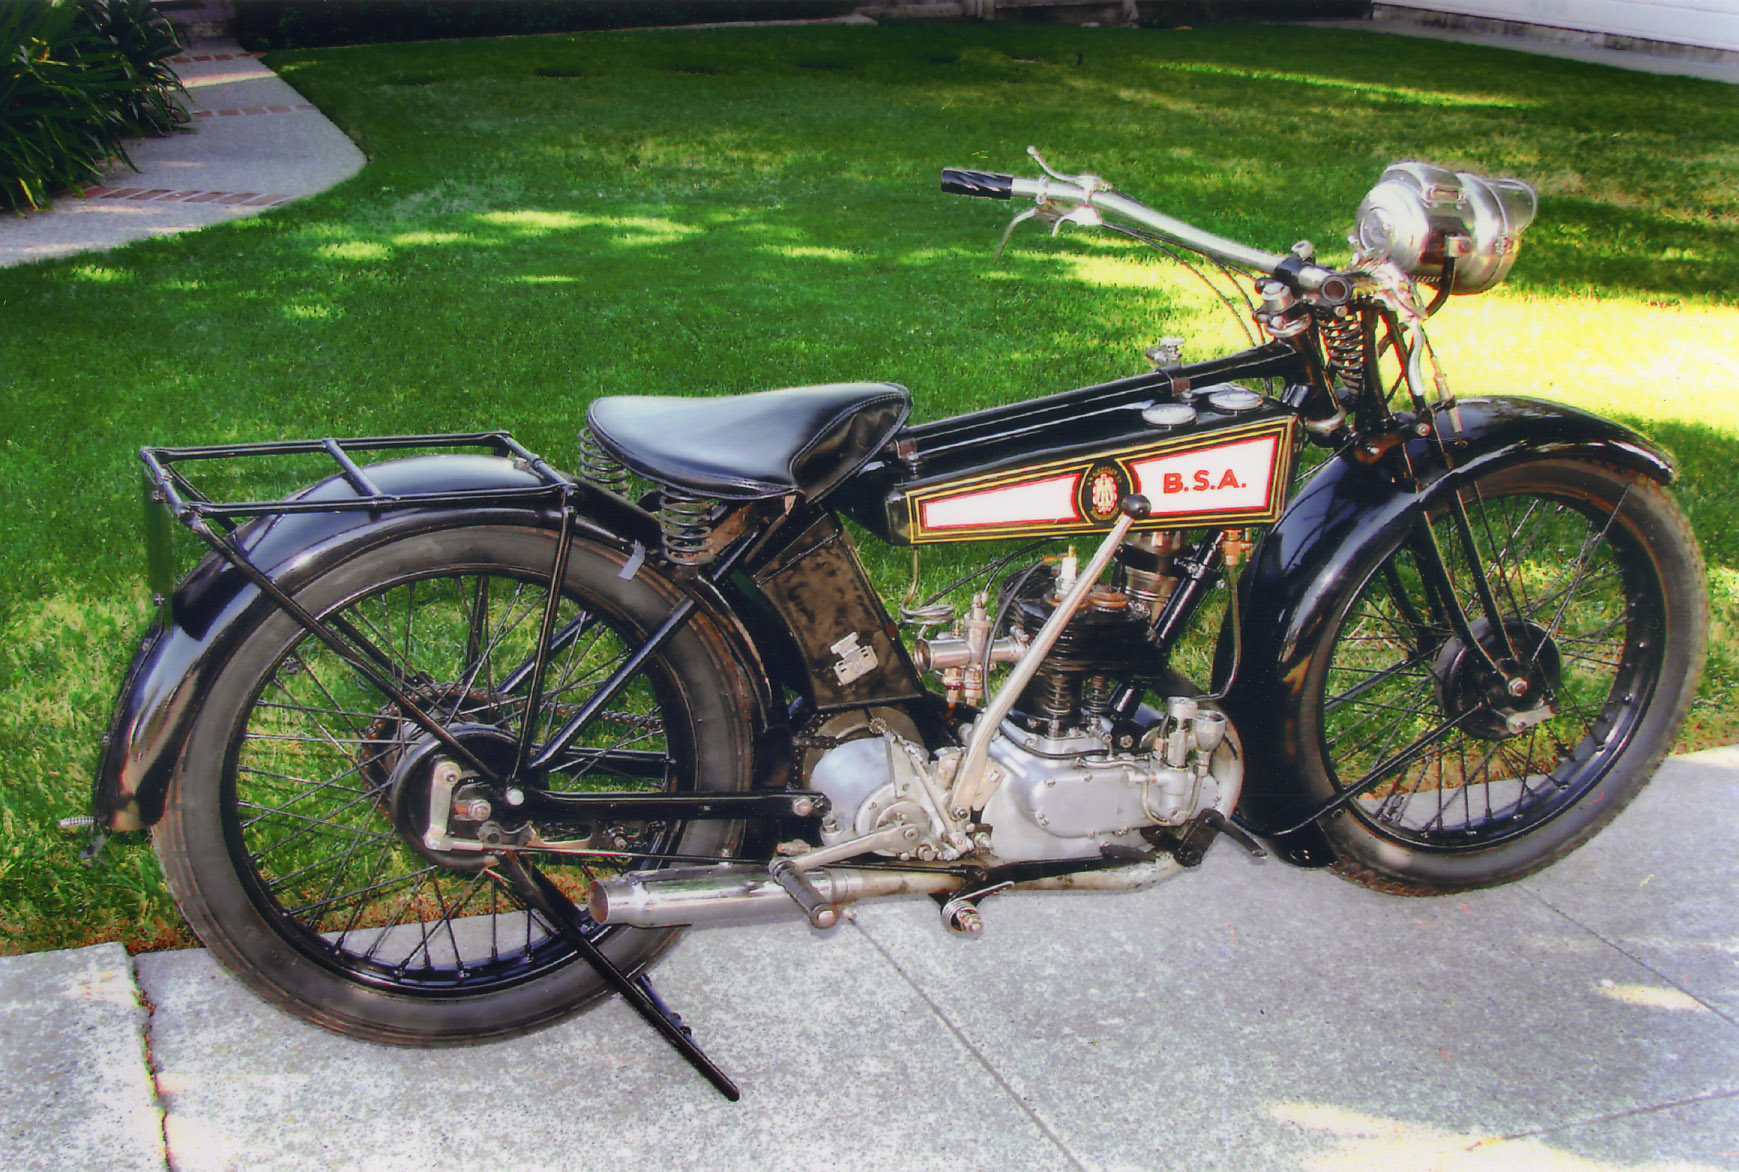 an old style motorcycle parked on the sidewalk near grass